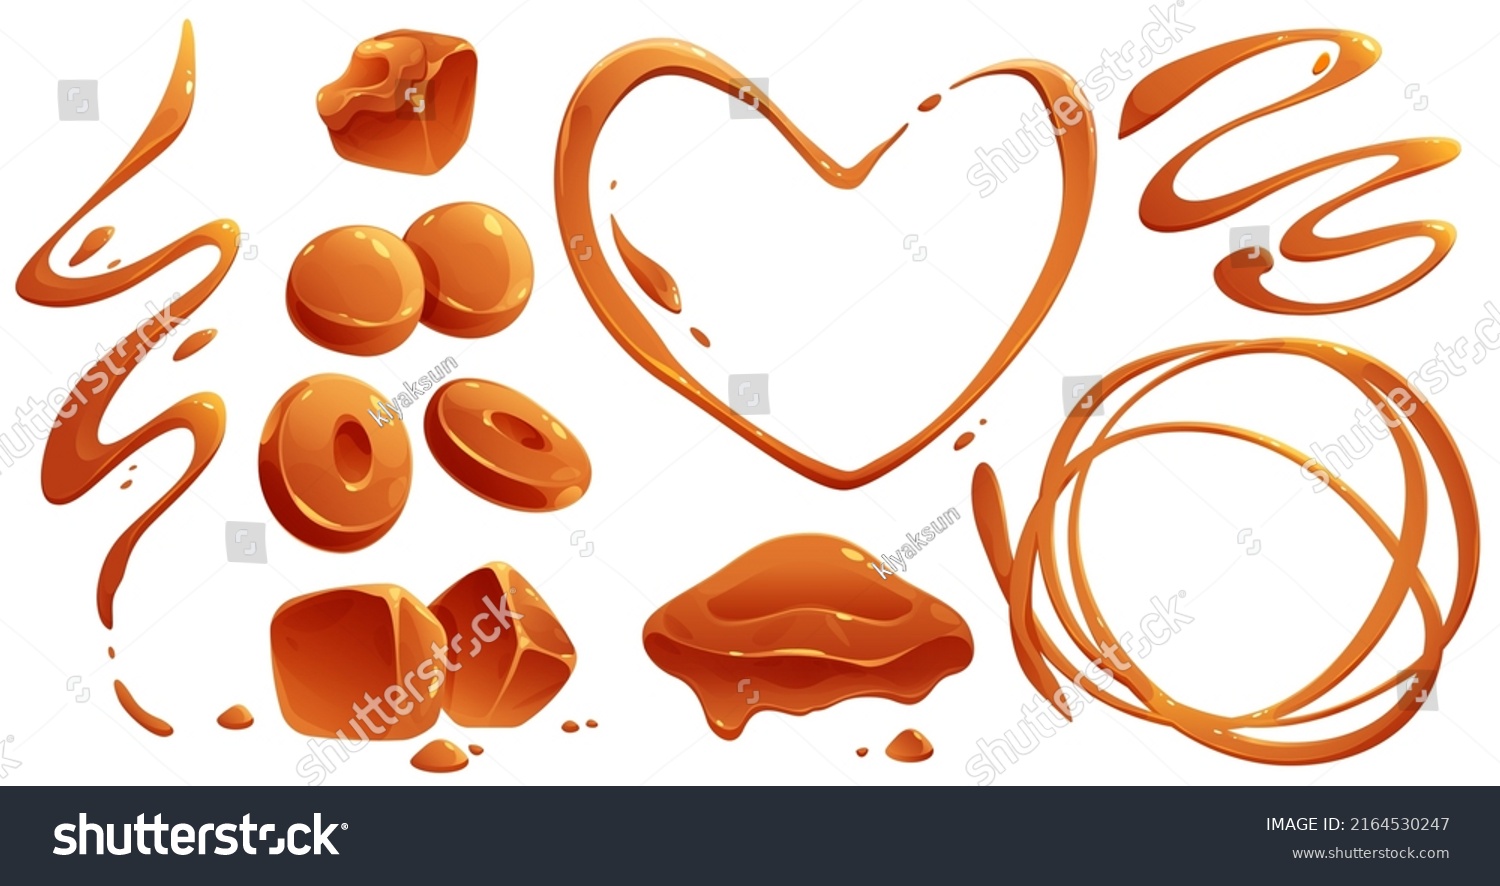 SVG of Toffee candies and liquid caramel splashes and flows. Vector cartoon set of sweet brown cream, fudge cubes, sugar or maple syrup drips and stains in shape of swirls, heart and waves svg